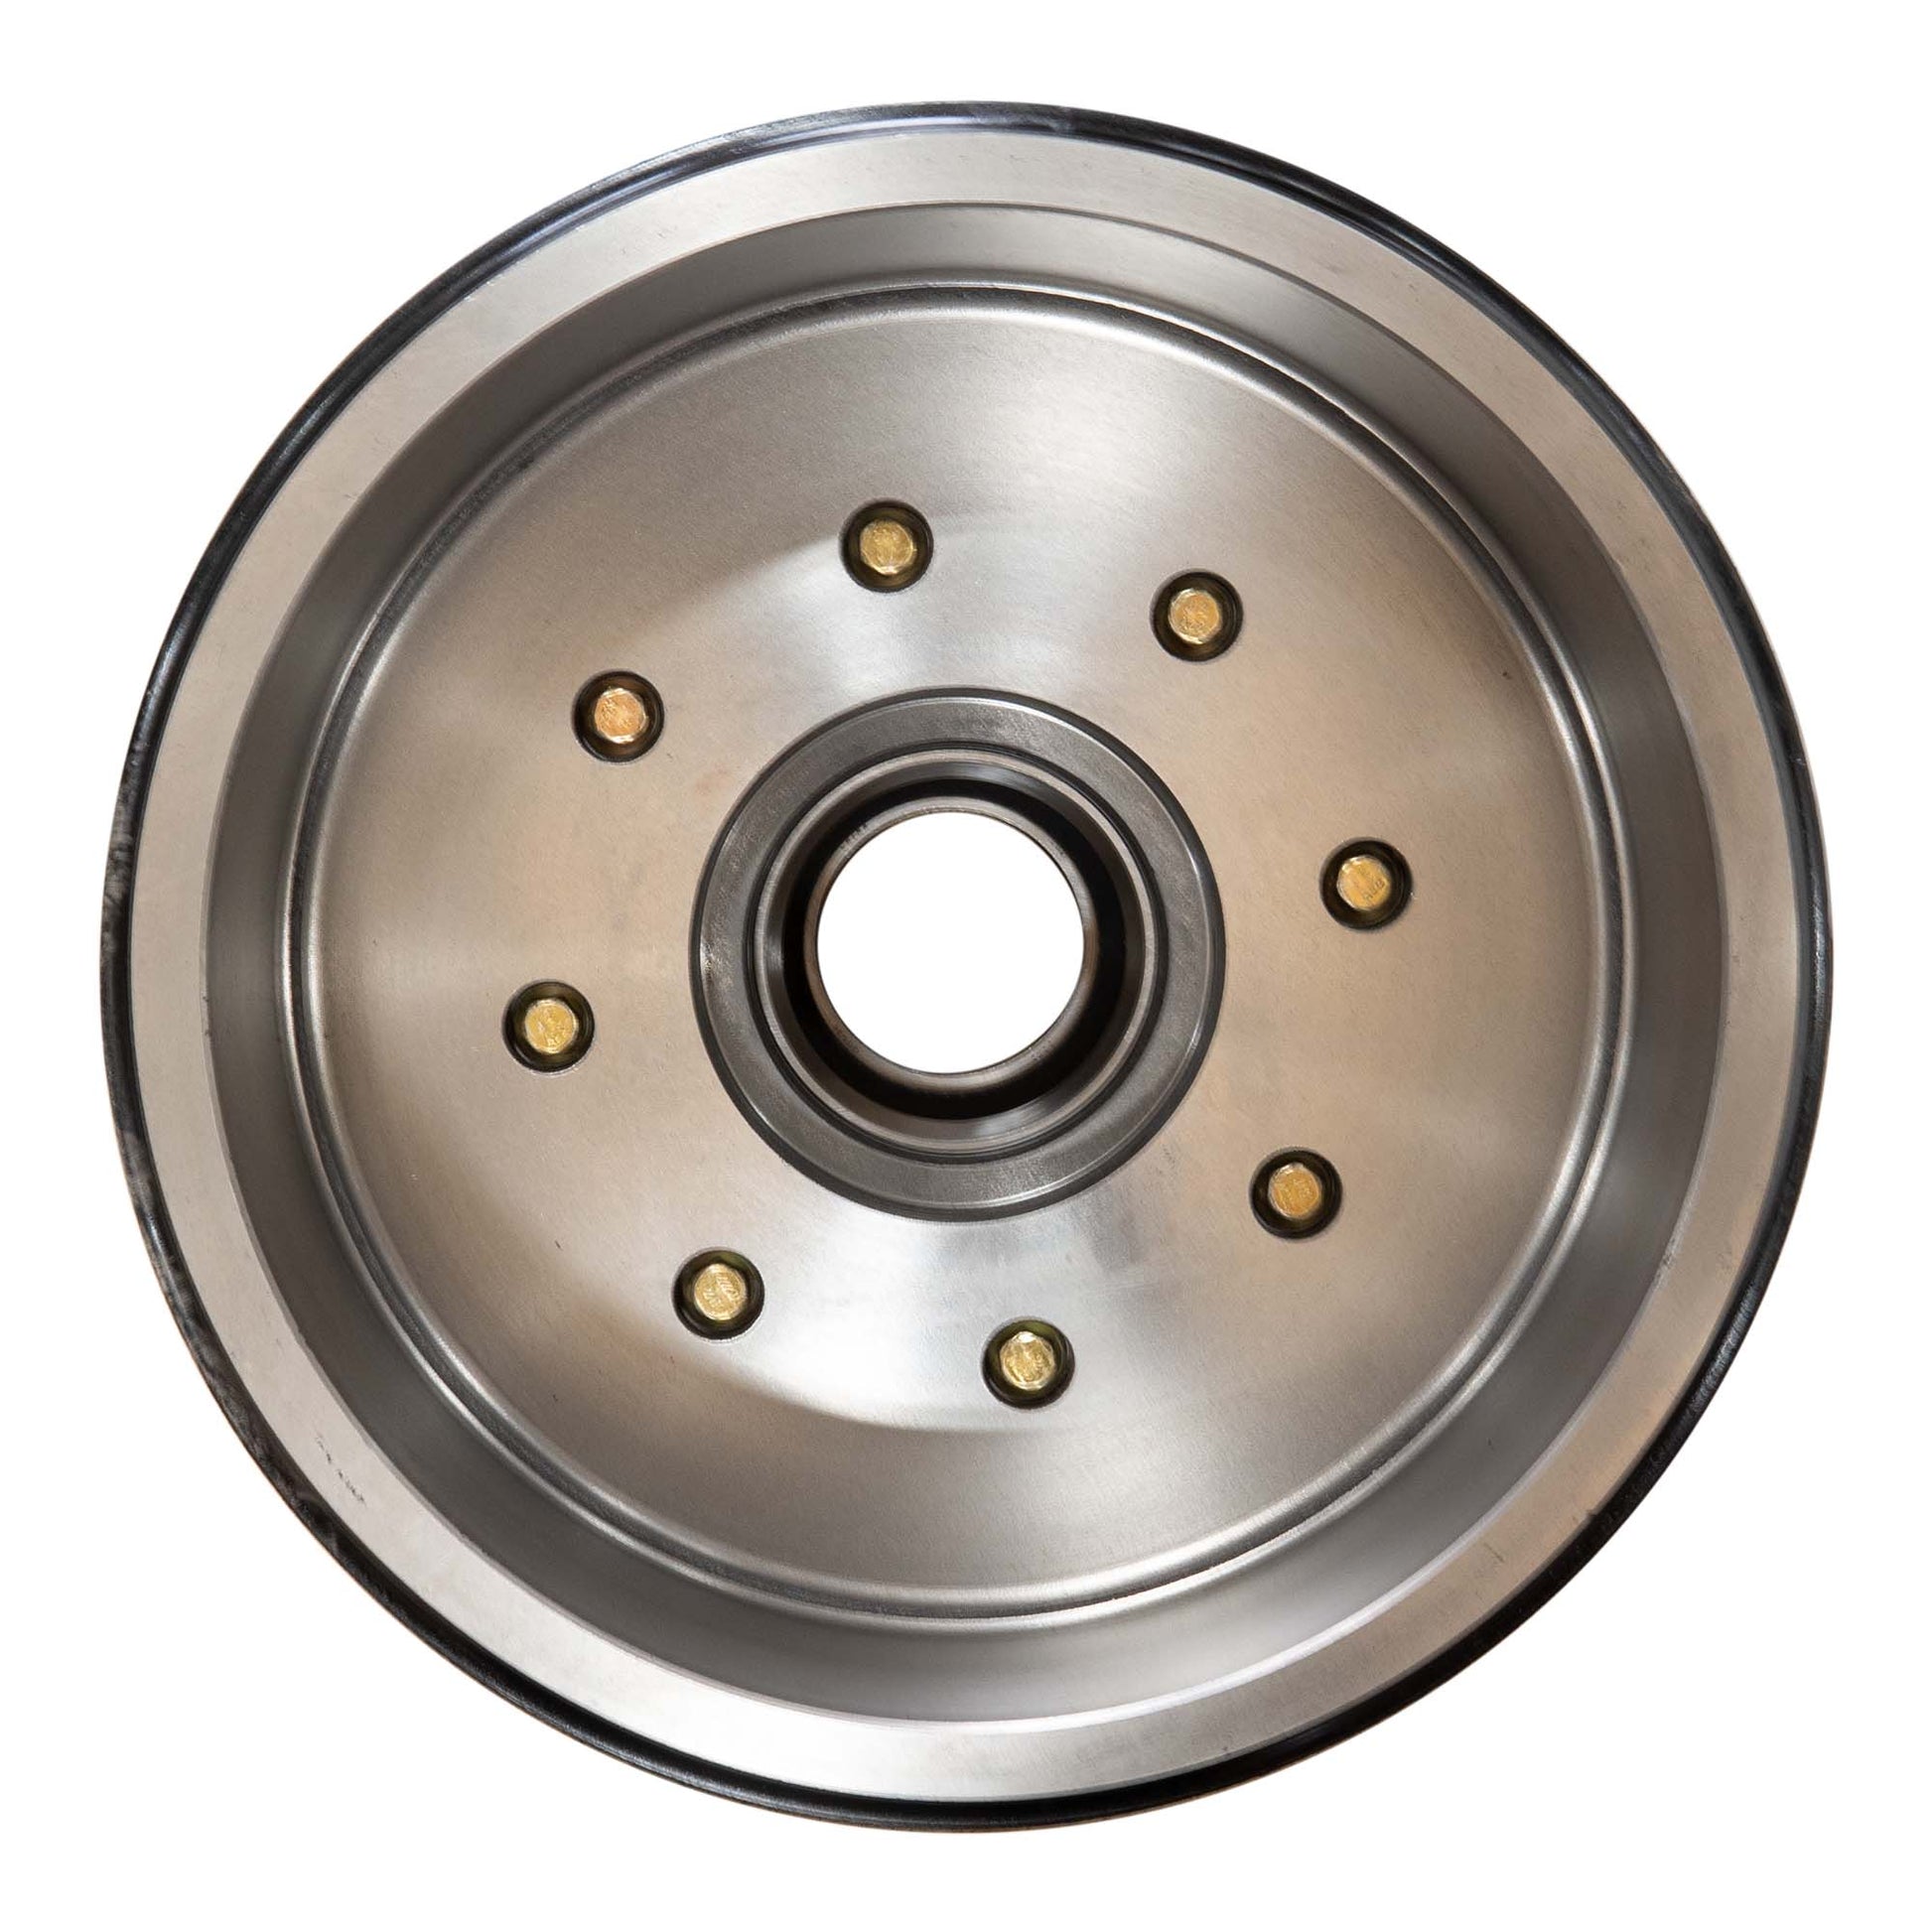 9-10KGD Trailer Axle Hub and Drum - 8 Lug (Made Before July 2009) - The Trailer Parts Outlet